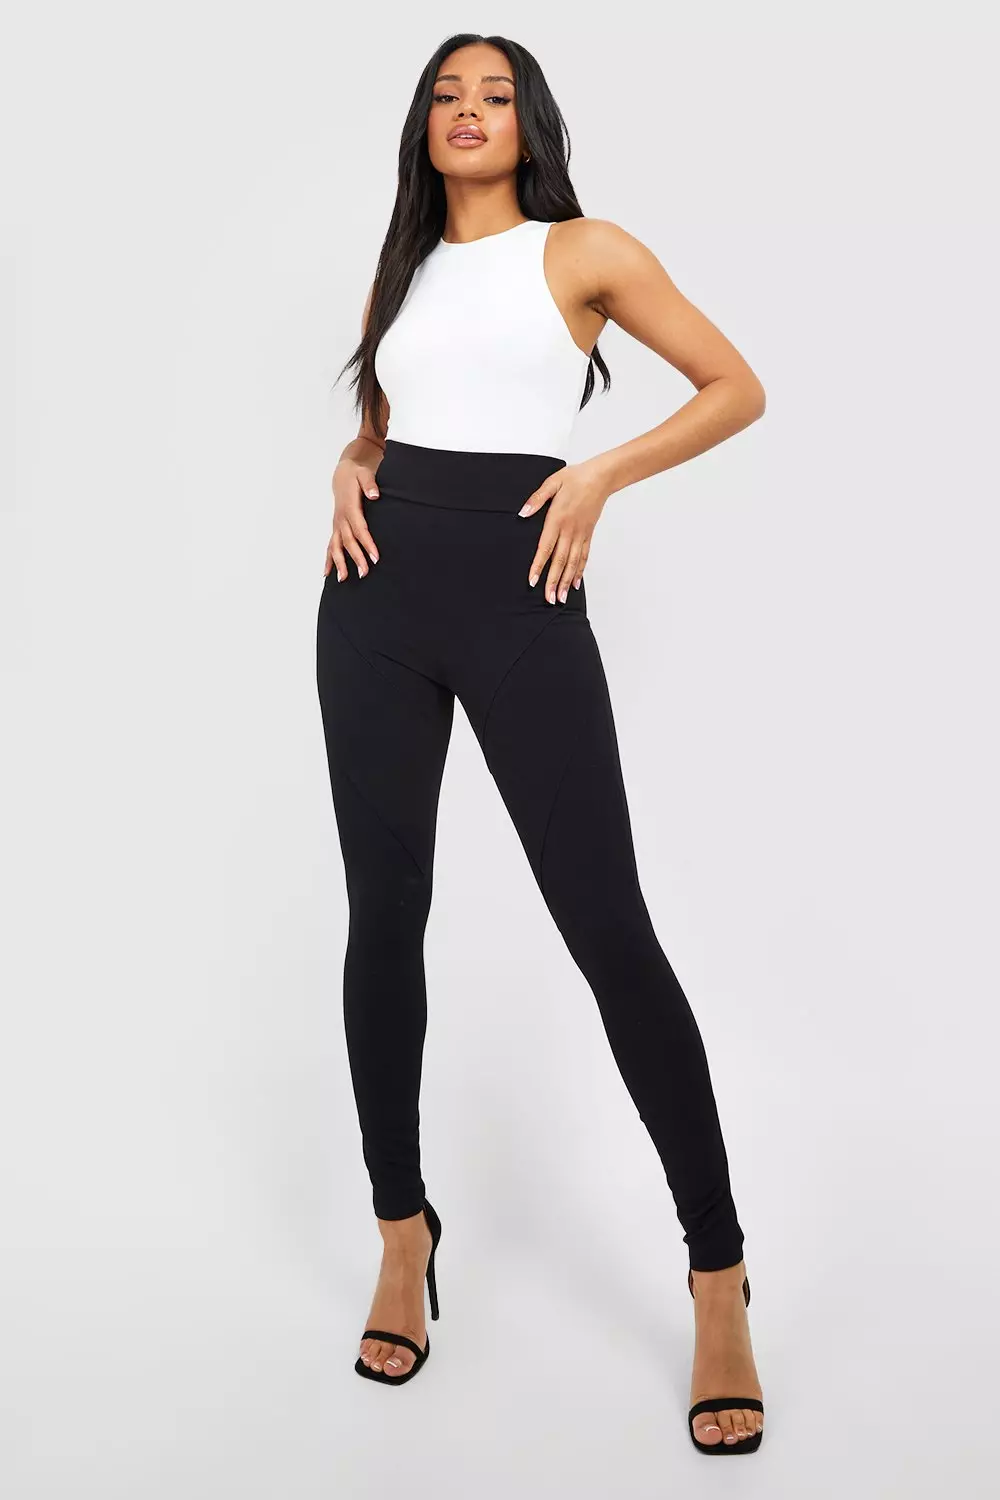 Leggings, Cinched High Waisted Contoured Leggings